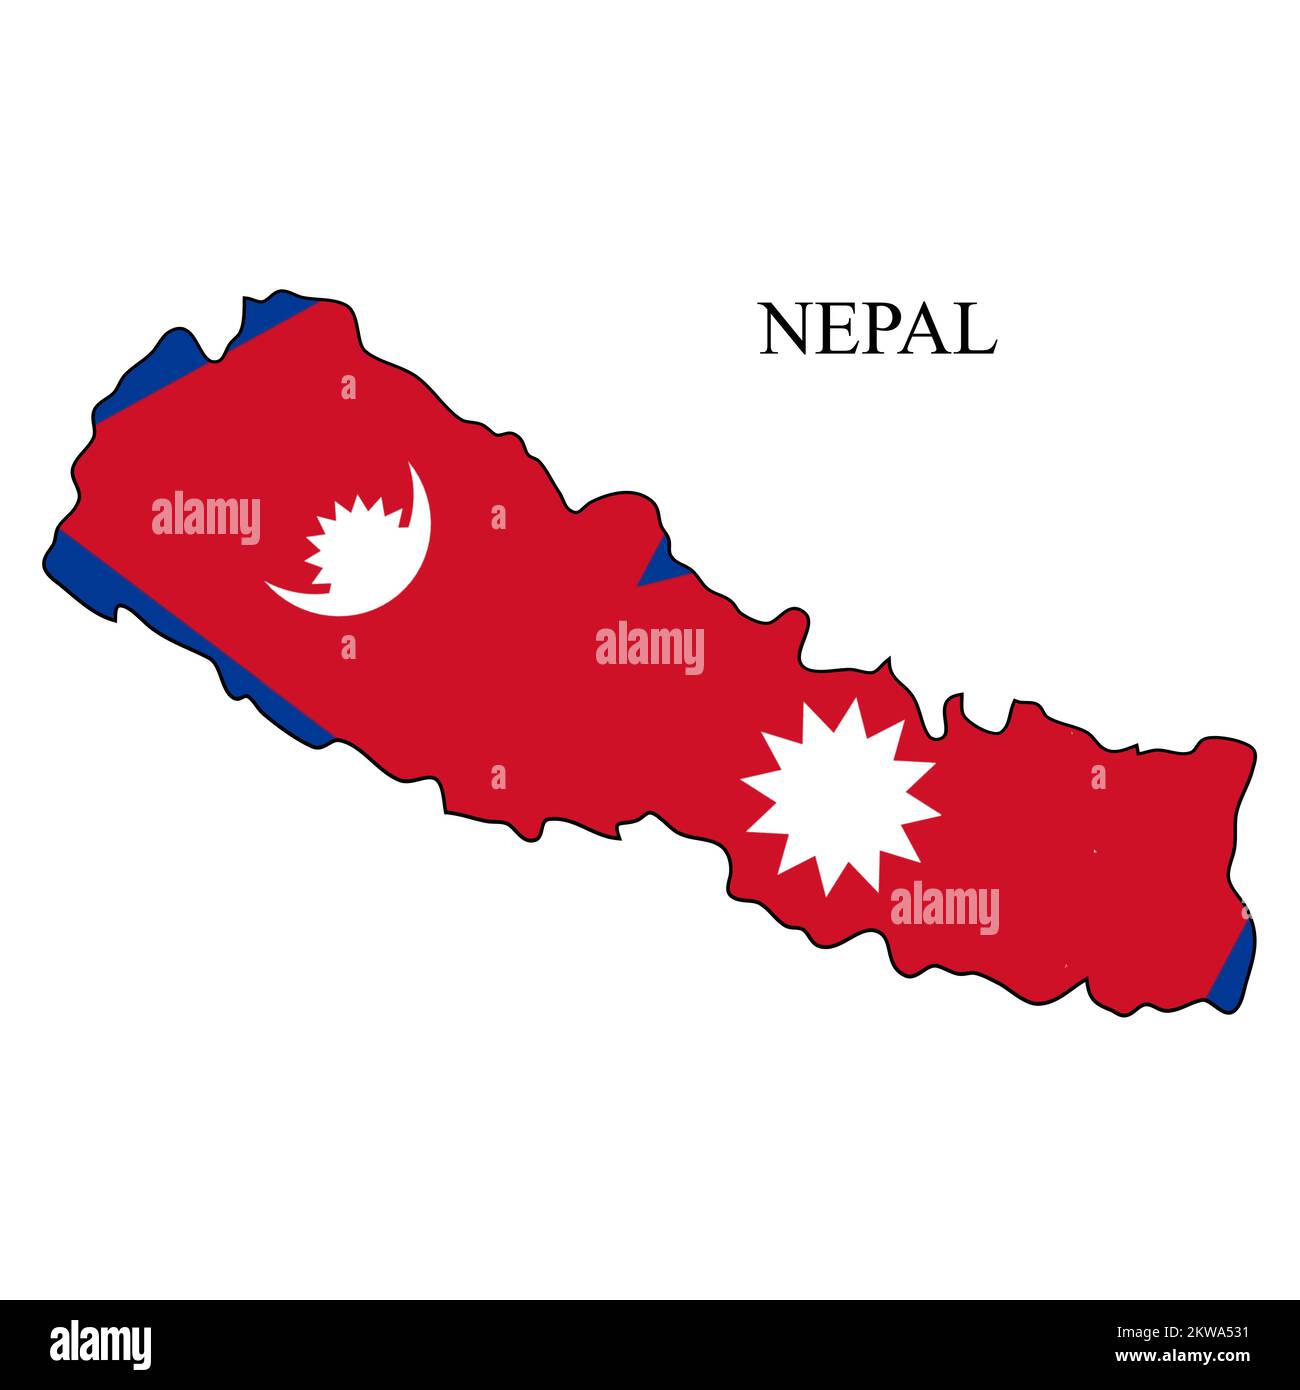 Nepal map vector illustration. Global economy. Famous country. South Asia Stock Vector